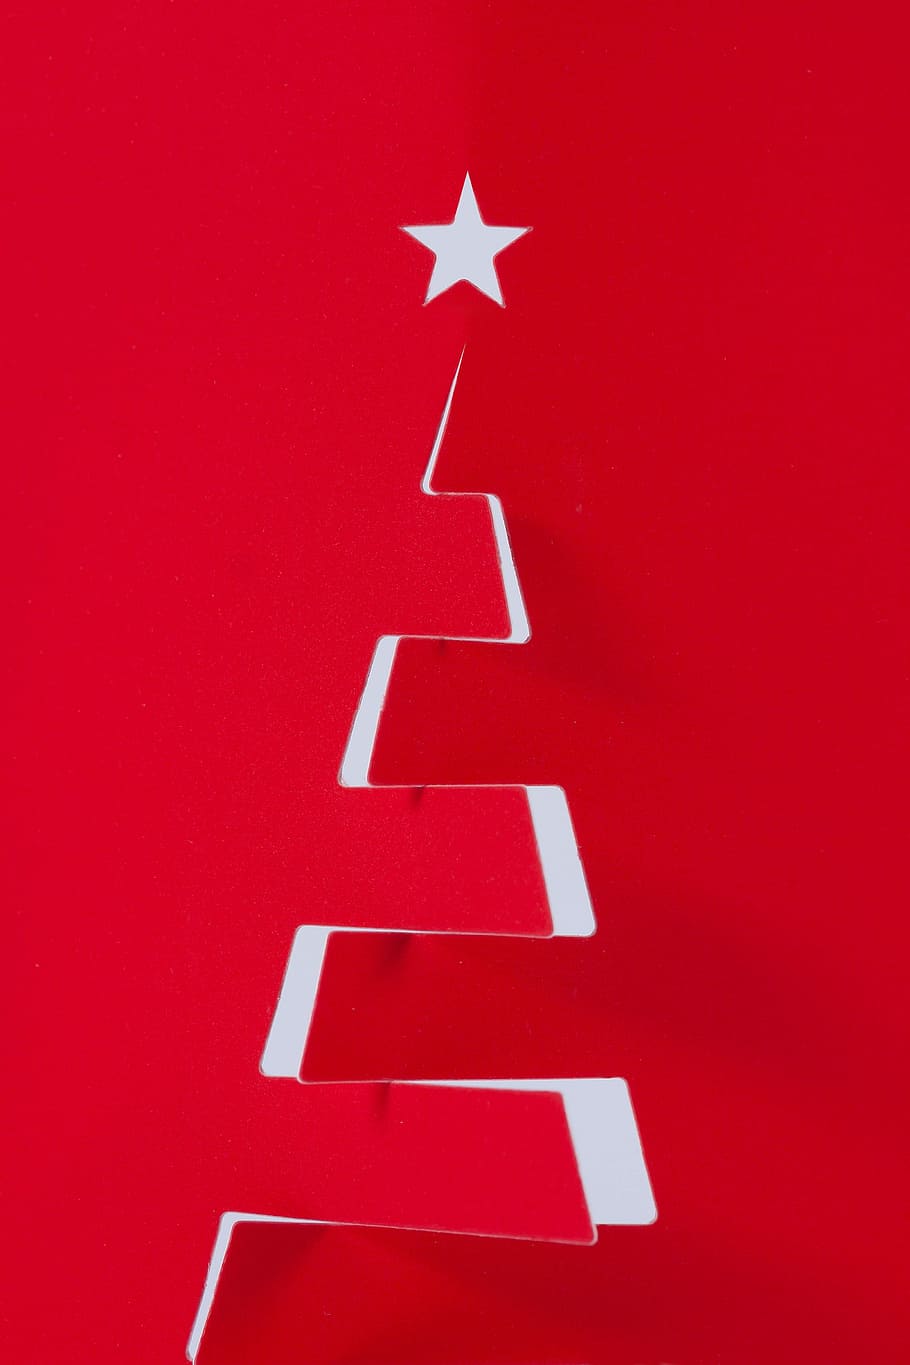 Christmas Tree, Christmas Decorations, fir, star, decoration, red, die cut, hack, pressure, pops up